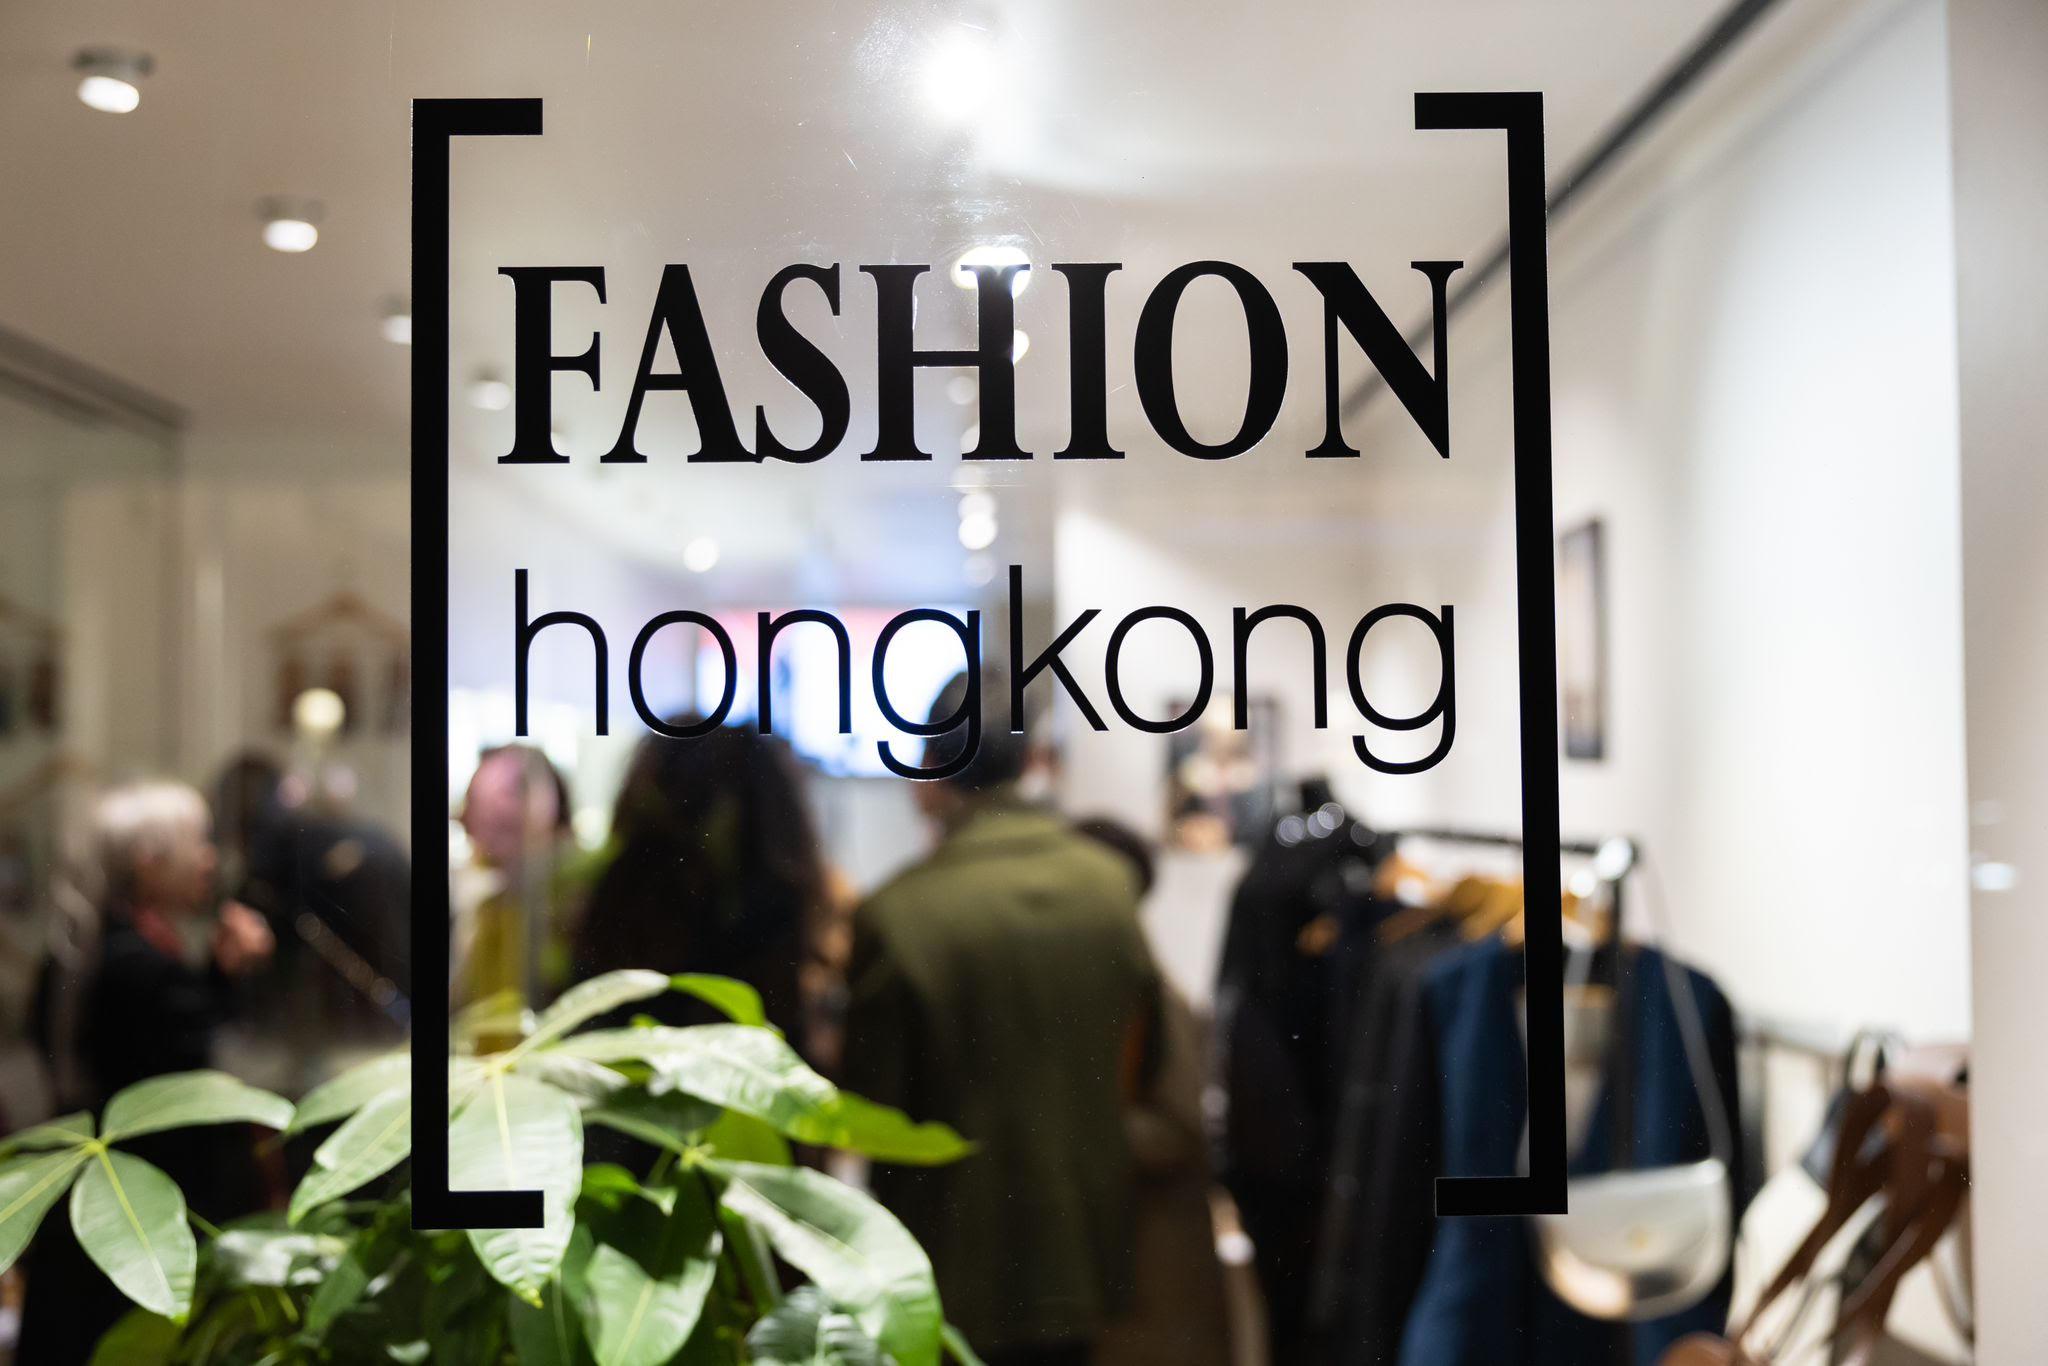 11 new Hong Kong designers are displaying their work ranging from clothing to jewellery and other accessories at a pop-up store in Paris till March 25.  The store also presents Hong Kong artists Yan-kiu Lam's miniature drawings, as well as Pen So's exhibition "Wanderers' Land- Cityscapes in Hong Kong".